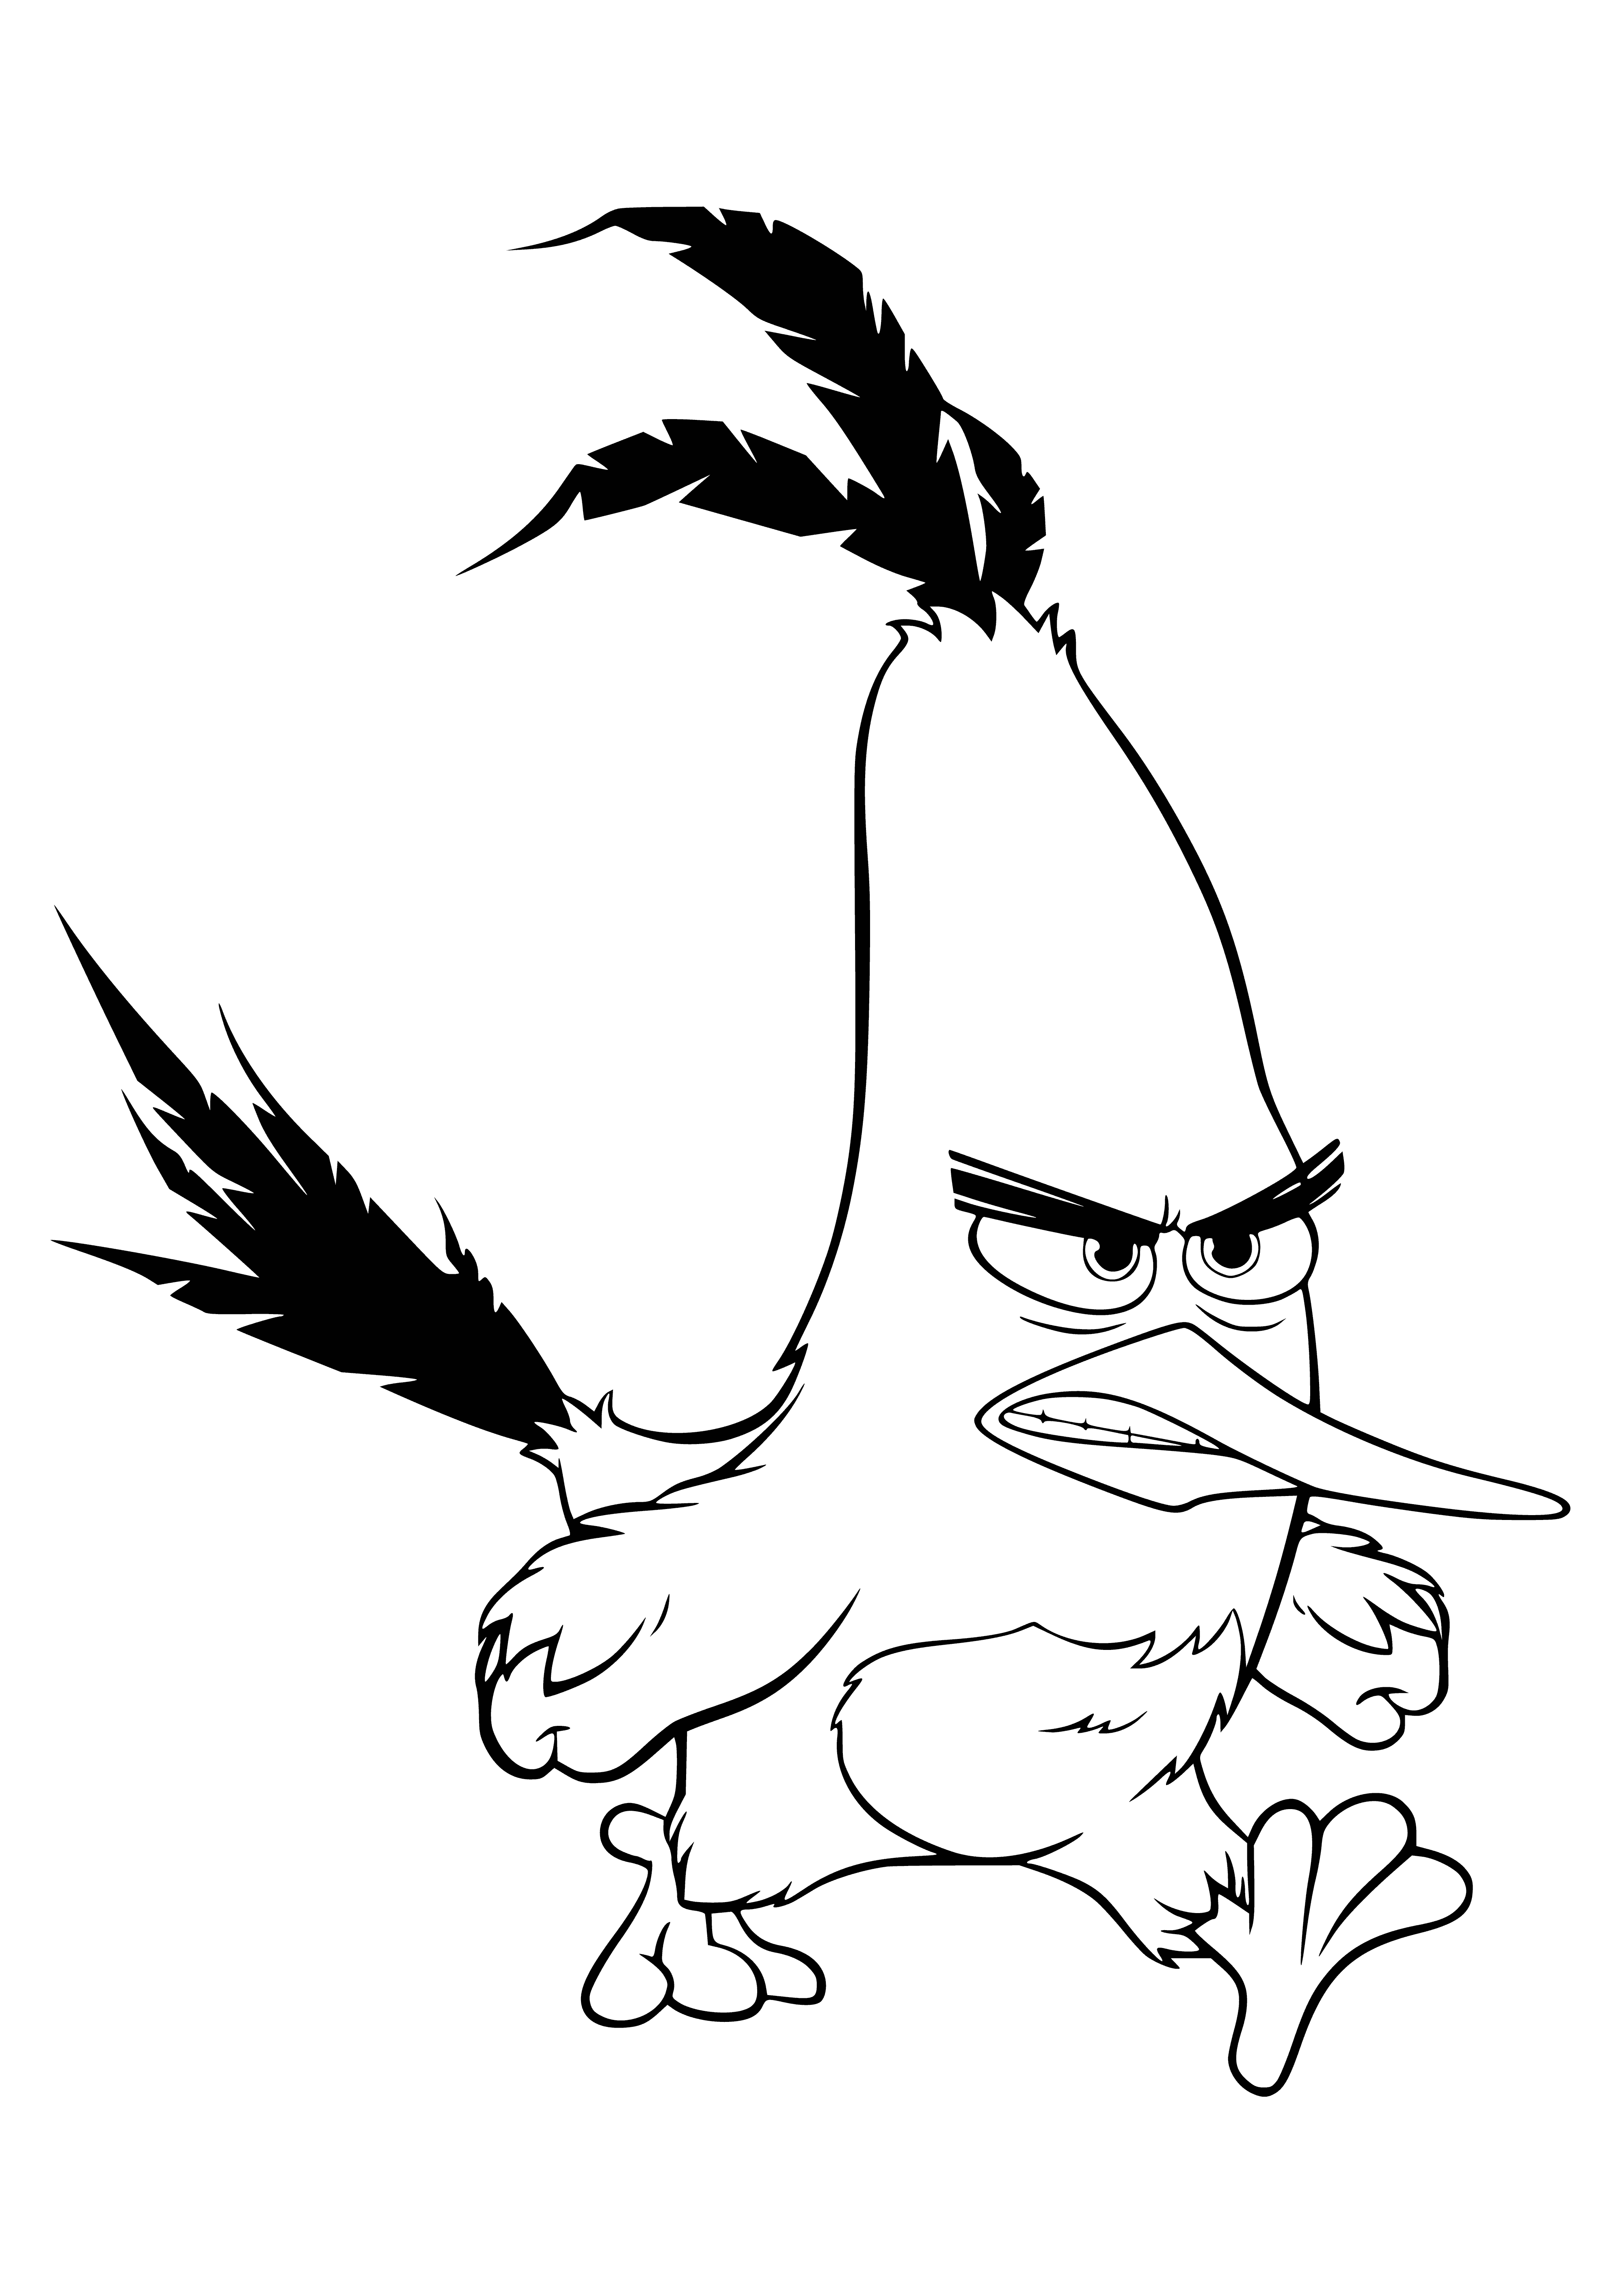 Chuck is angry coloring page